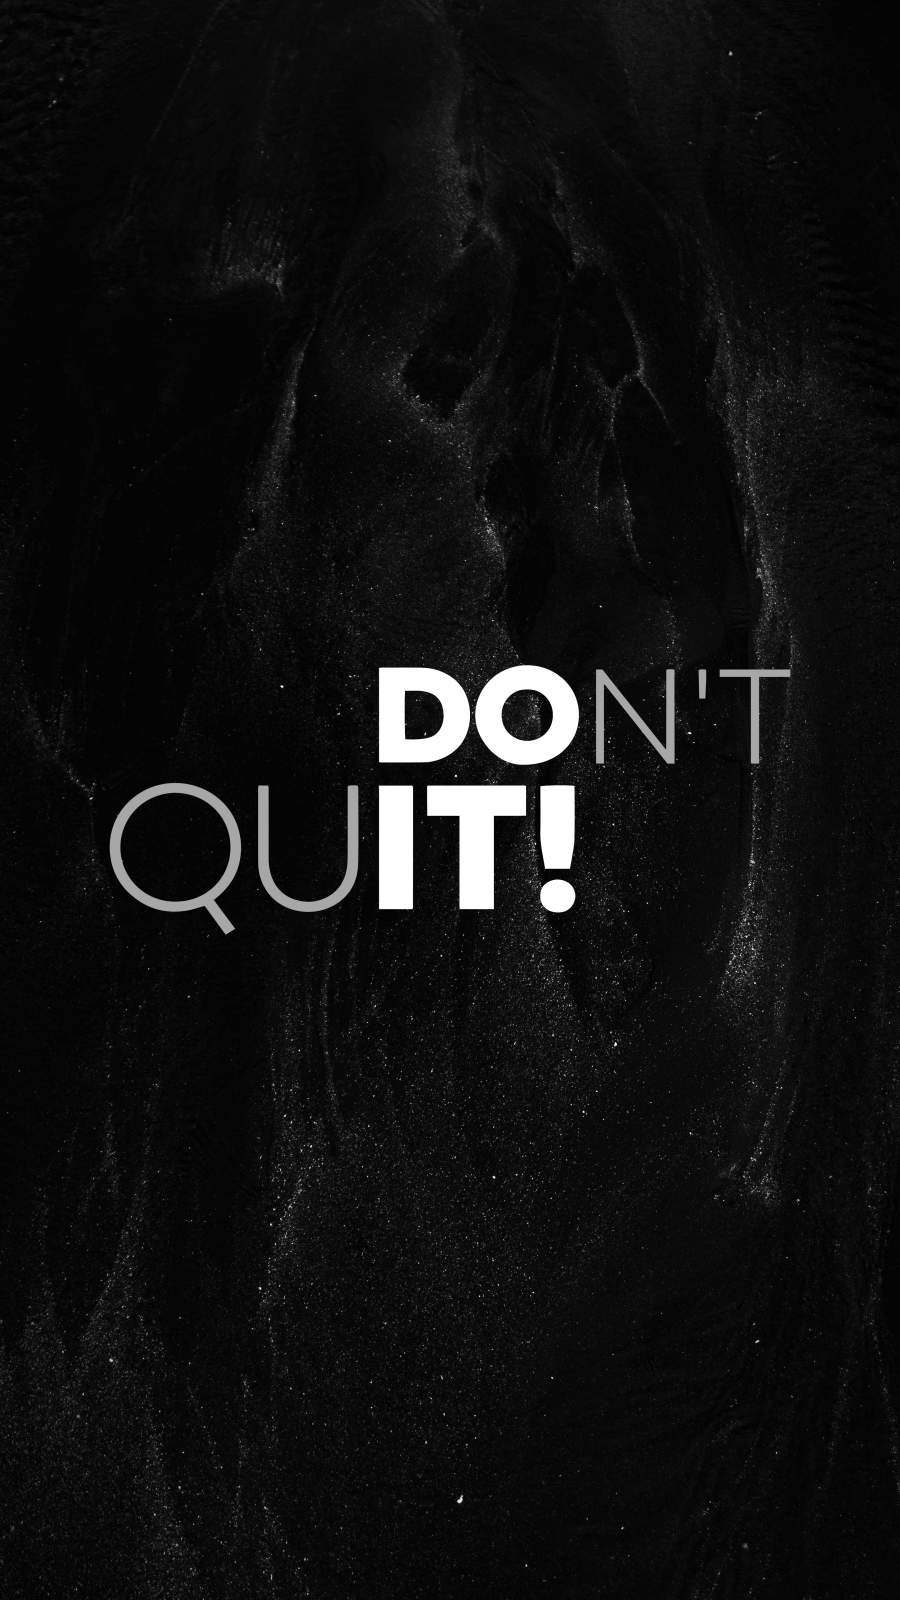 Do IT IPhone Wallpaper - IPhone Wallpapers : iPhone Wallpapers